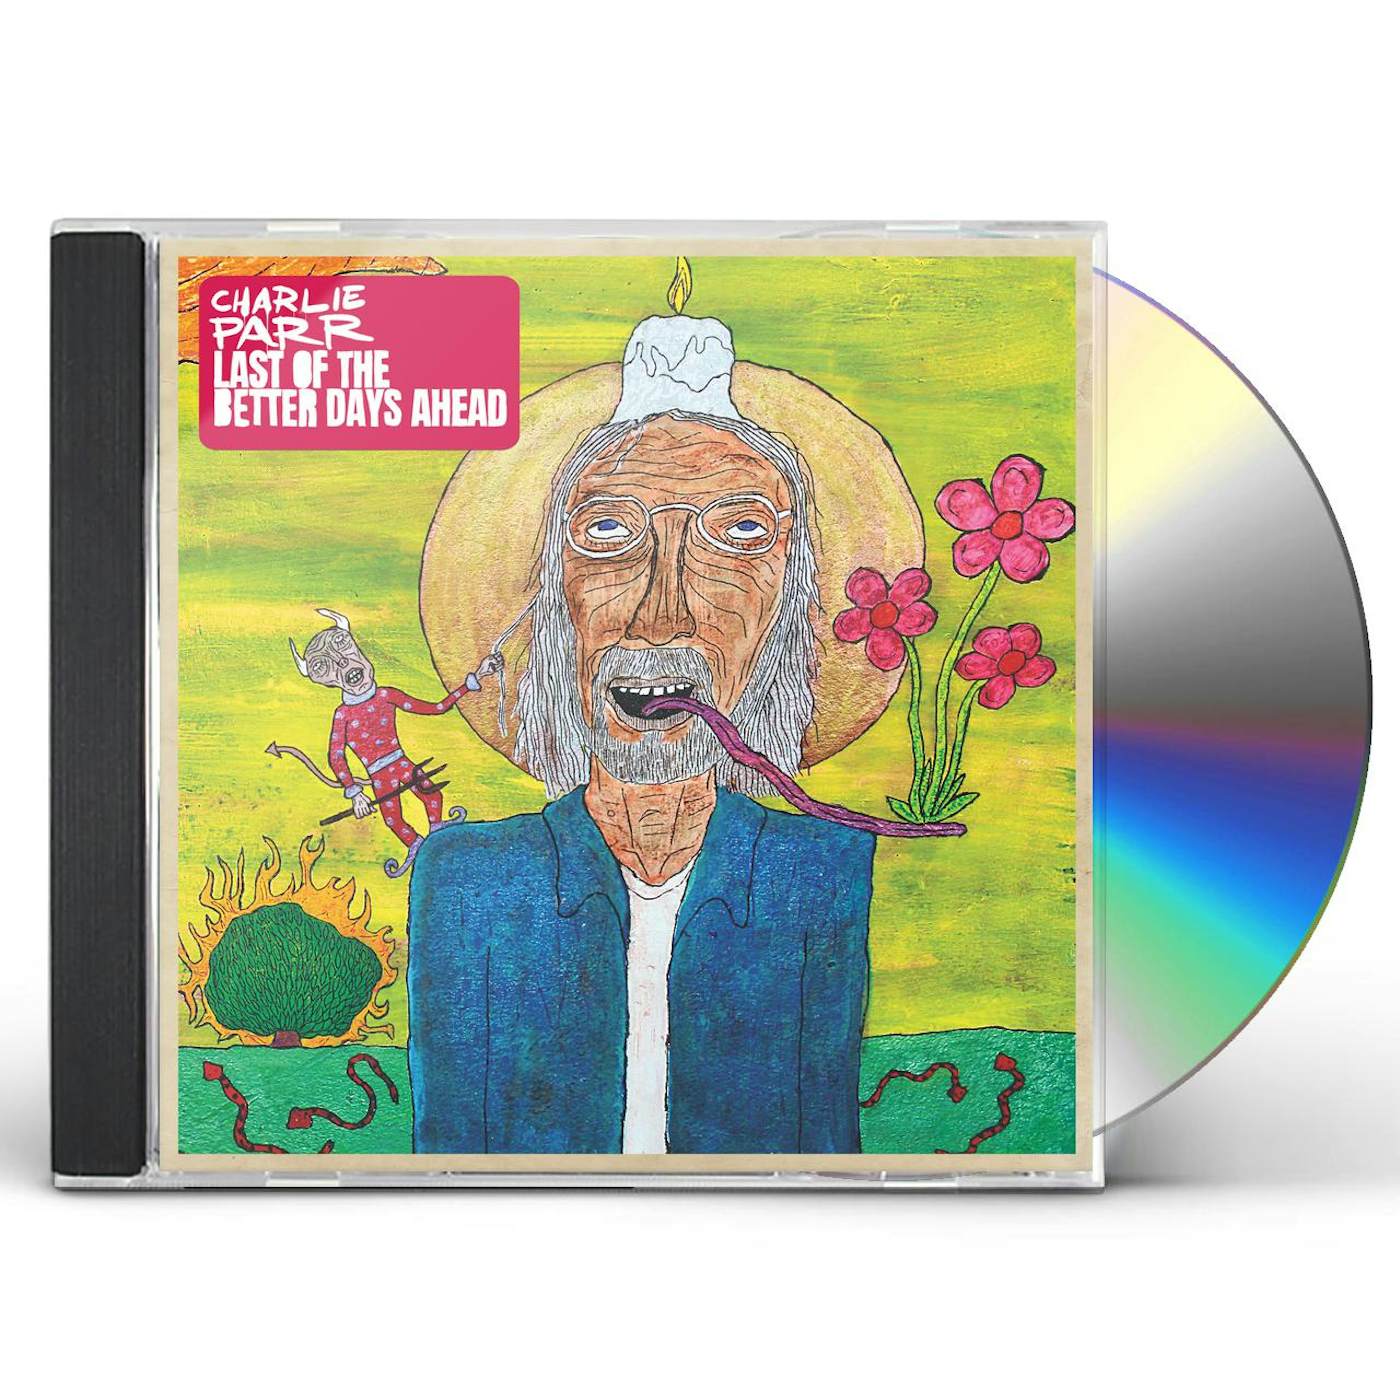 Charlie Parr LAST OF THE BETTER DAYS AHEAD CD